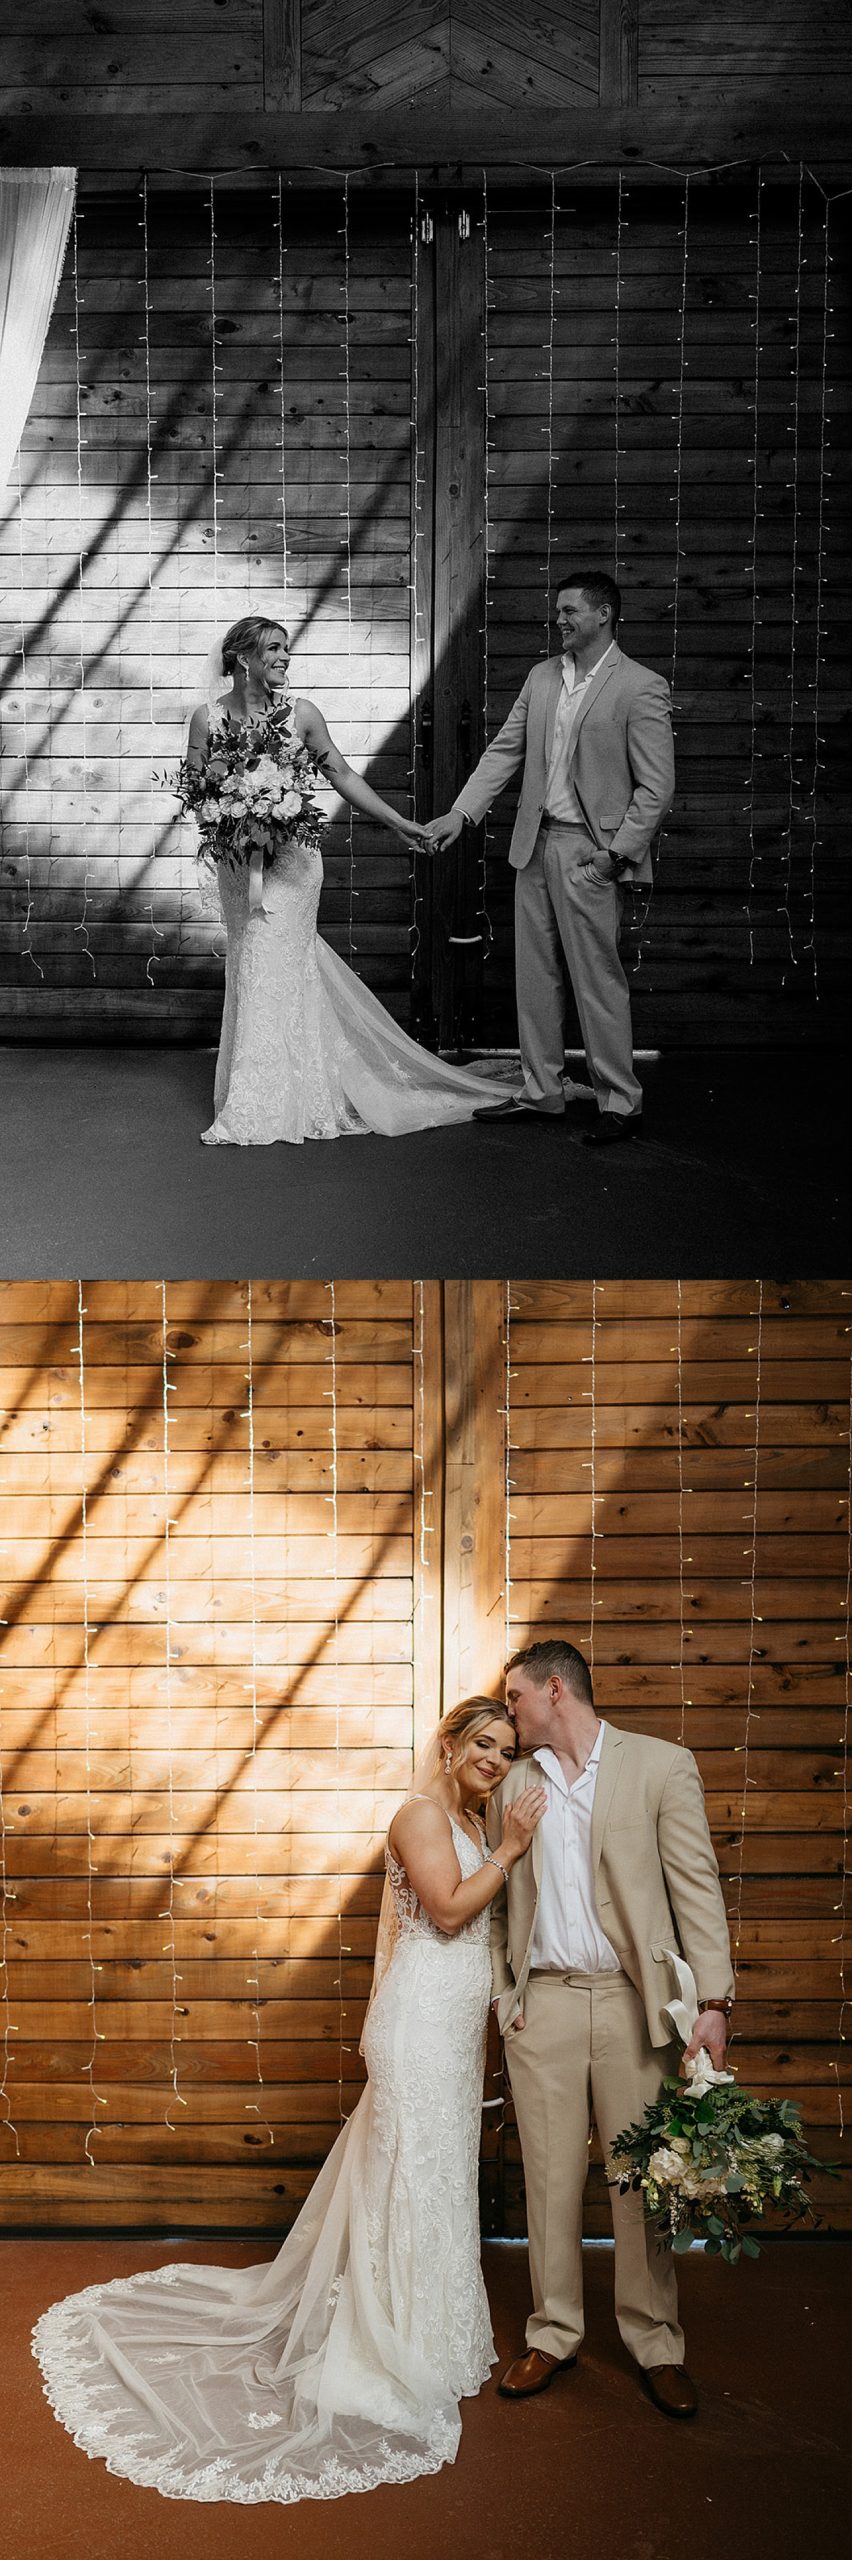 Bride and groom at Lauren Hill Farm standing in front of string lights after first look